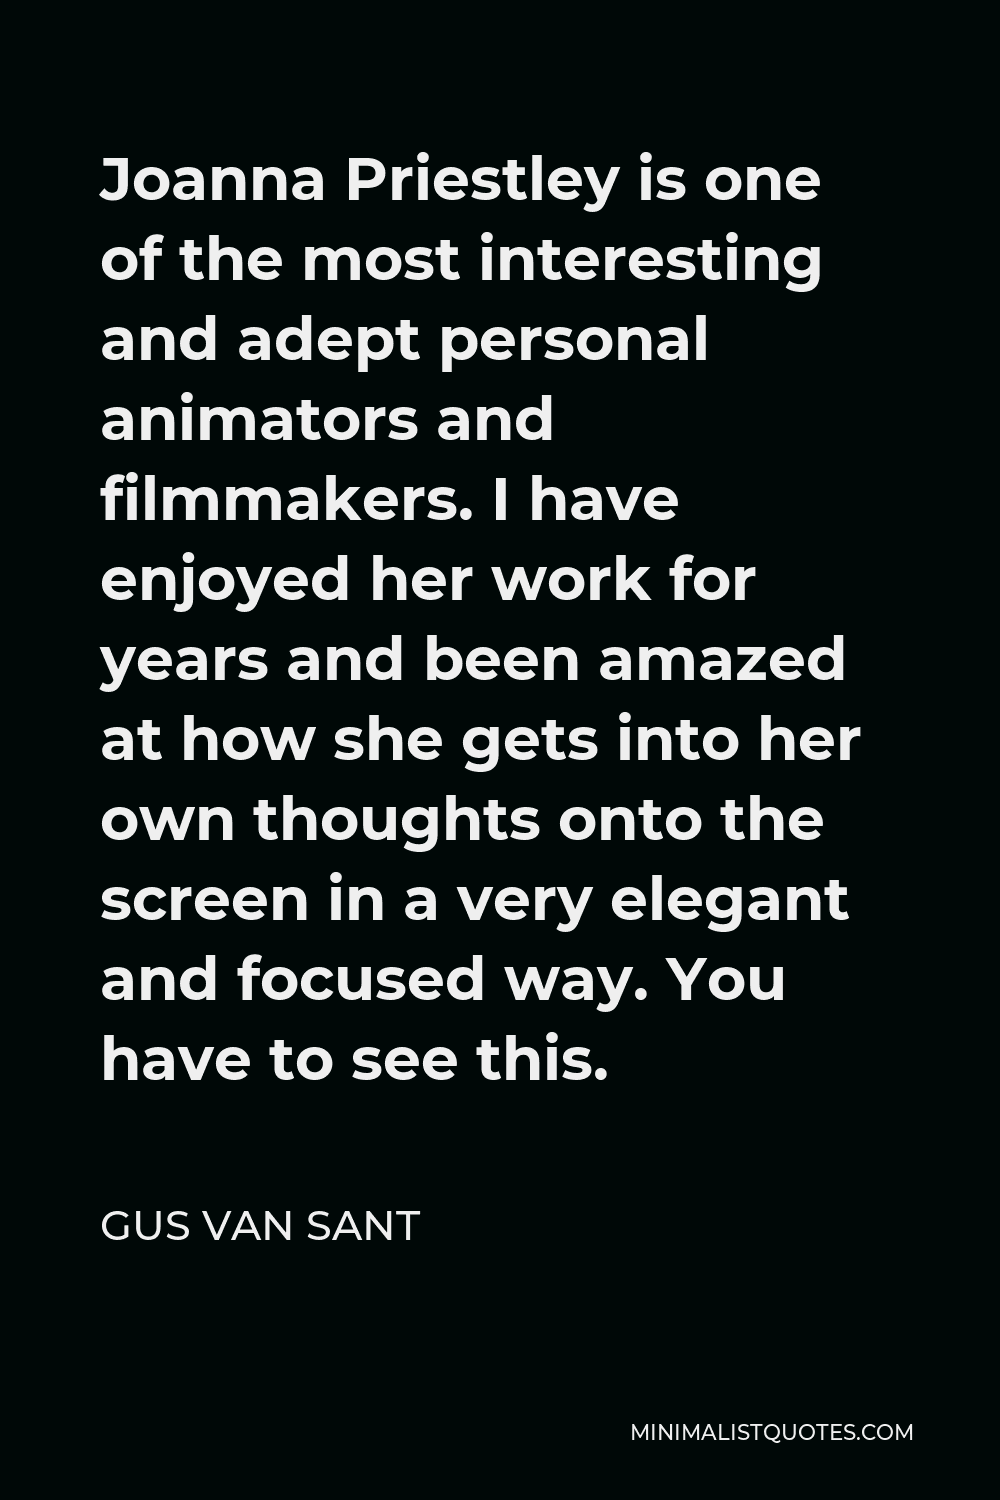 Gus Van Sant Quote - Joanna Priestley is one of the most interesting and adept personal animators and filmmakers. I have enjoyed her work for years and been amazed at how she gets into her own thoughts onto the screen in a very elegant and focused way. You have to see this.